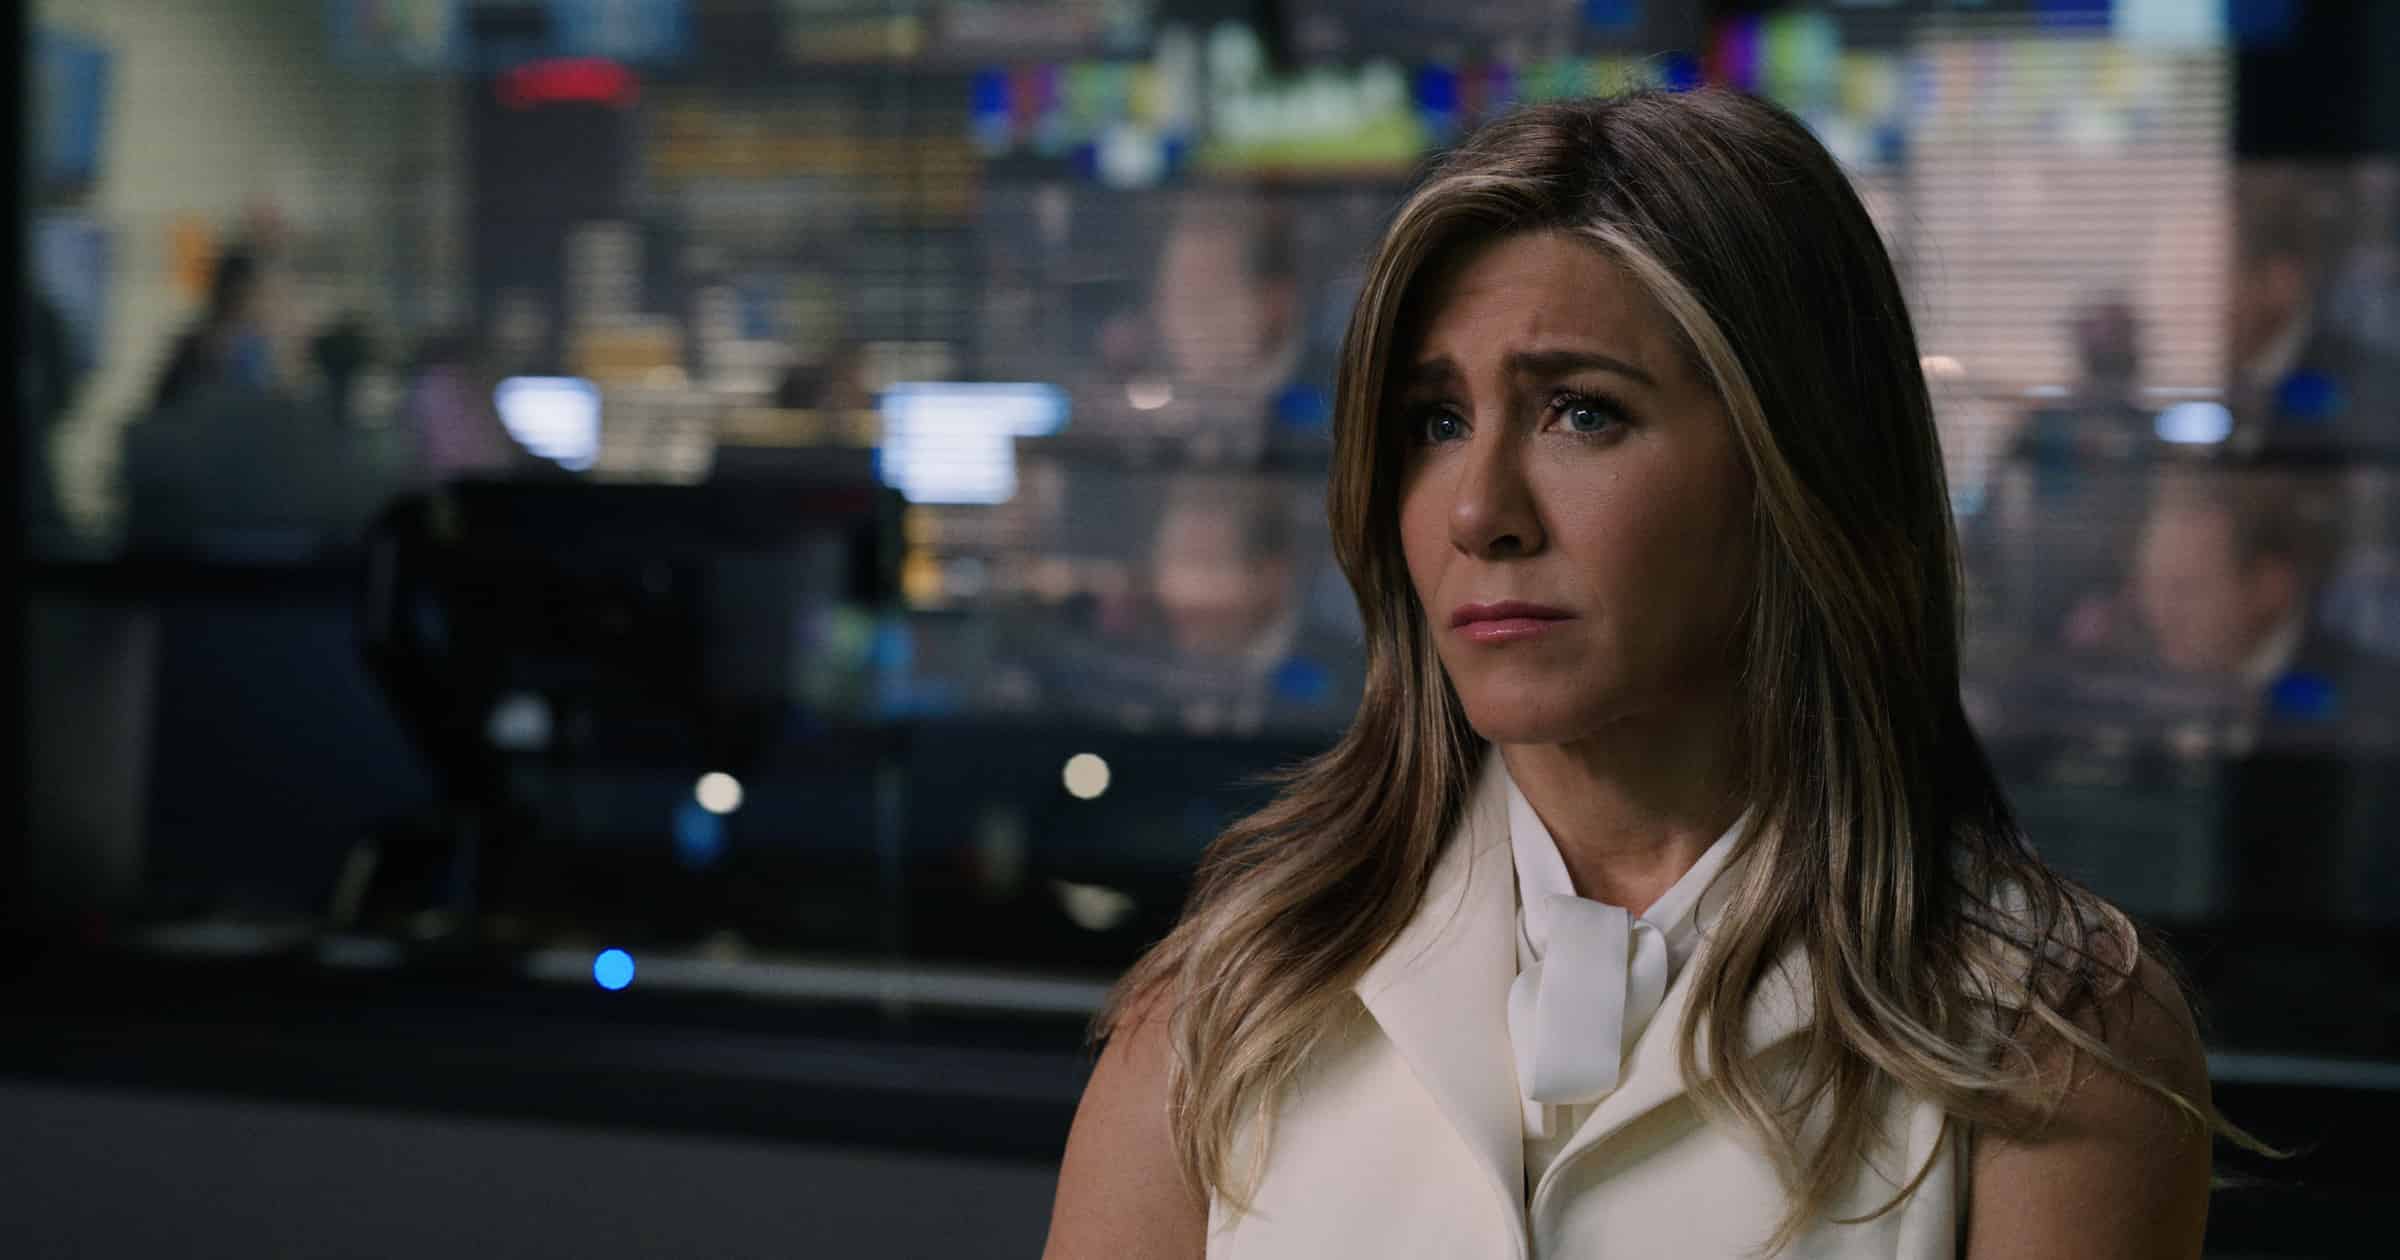 ‘The Morning Show’ Was Like ’20 Years of Therapy’, Says Jennifer Aniston